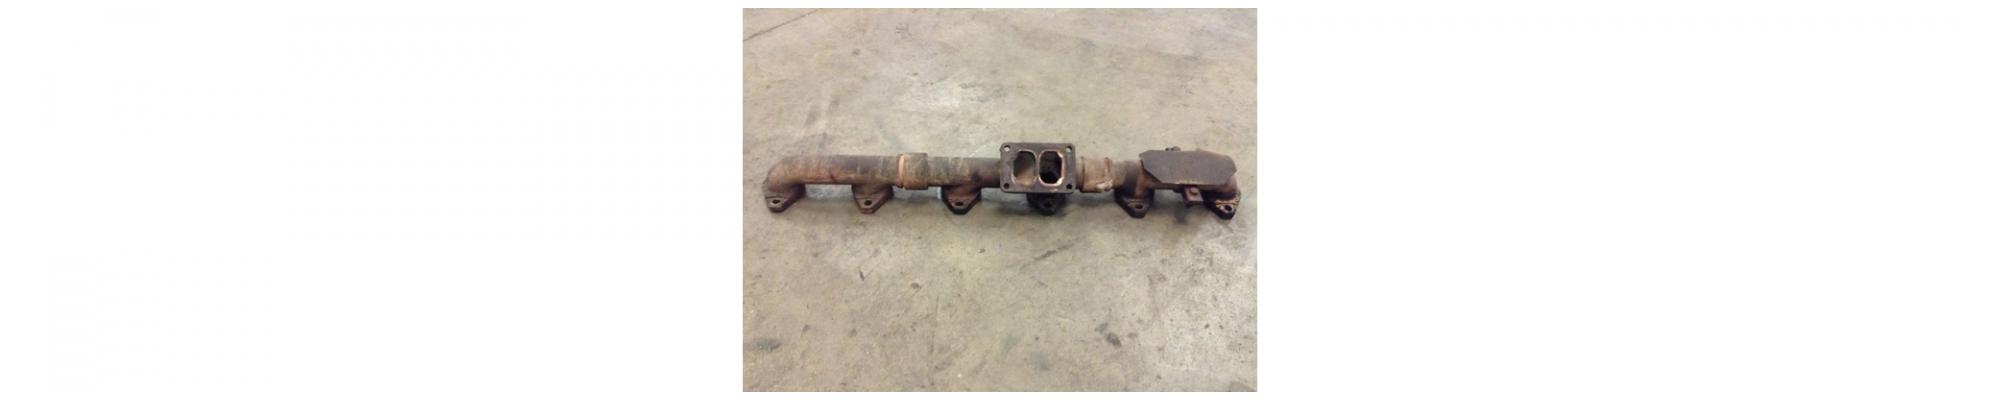 CAT 3406E 14.6L Exhaust Manifold in Spencer, IA #24485836